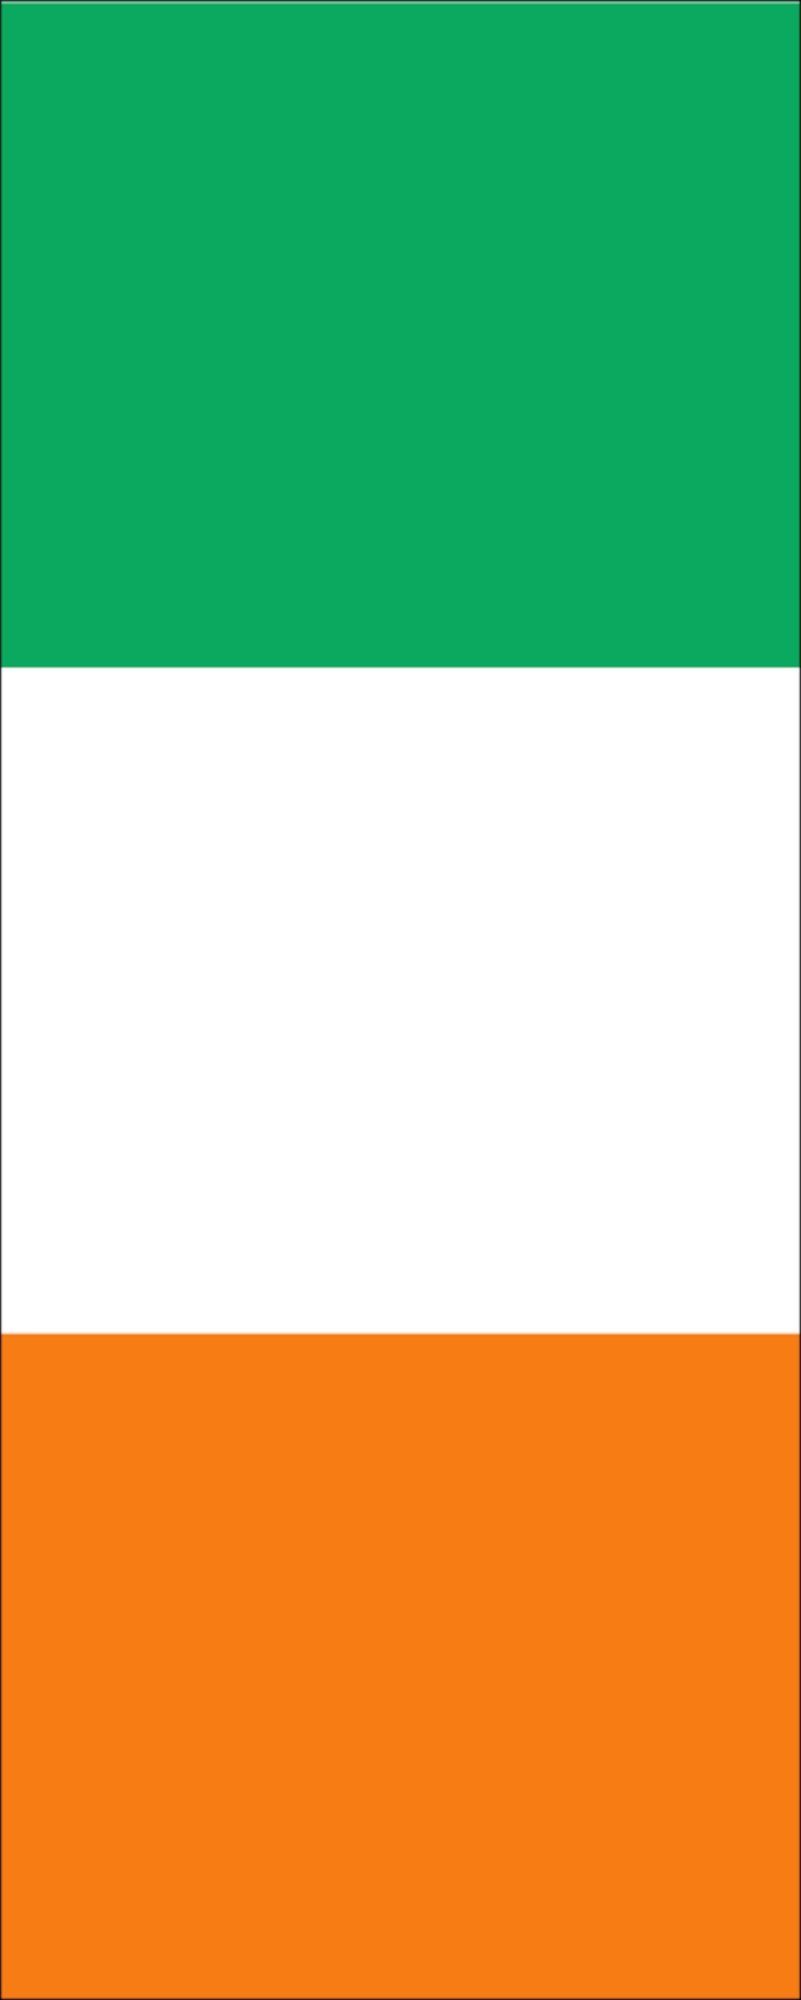 flaggenmeer Flagge Flagge Irland 110 g/m² Hochformat